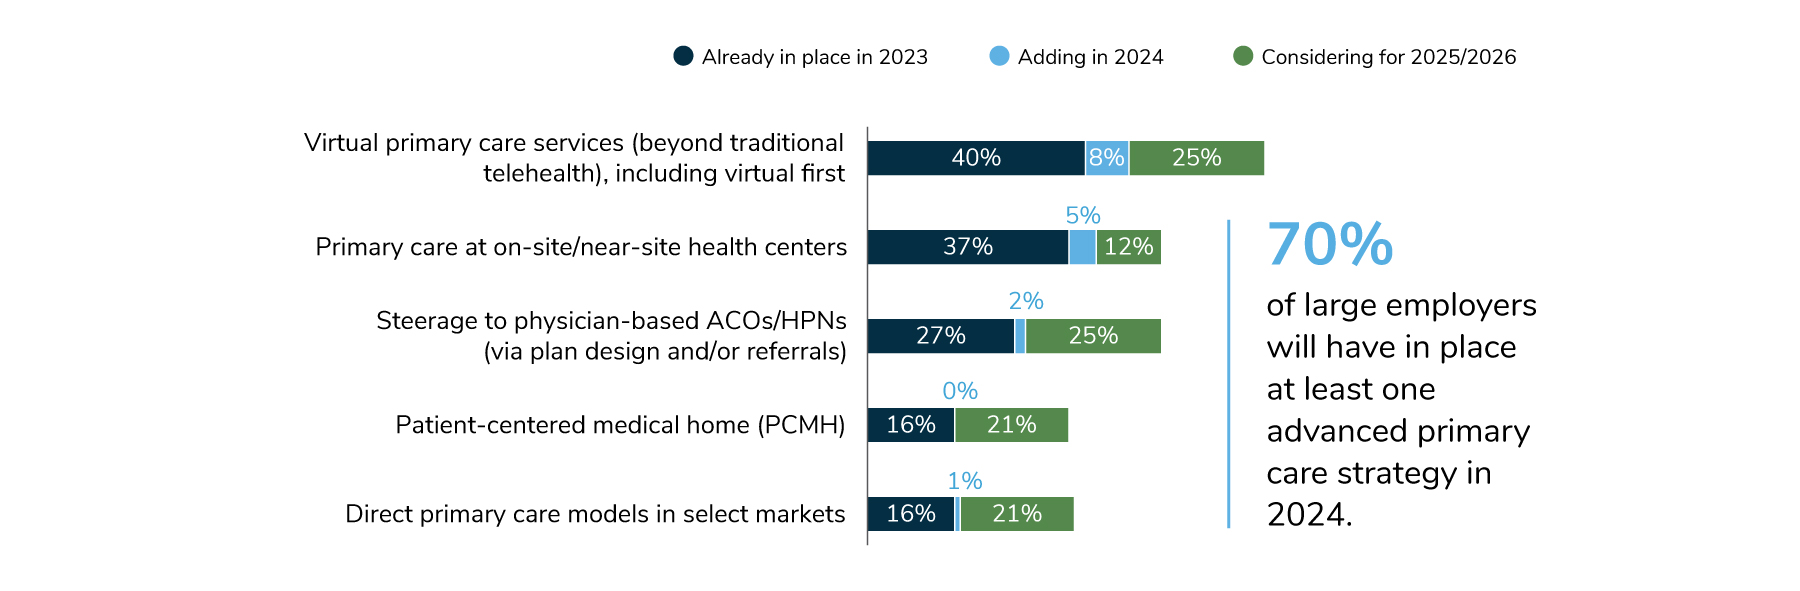 48% of employers will offer virtual primary care services in 2024. 42% will offer primary care at on-site/near-site health centers. 29% will have steerage to physician-based ACOs/HPNs in place. 16% will offer patient-centered medical homes. 17% will offer direct primary care models in select markets.
